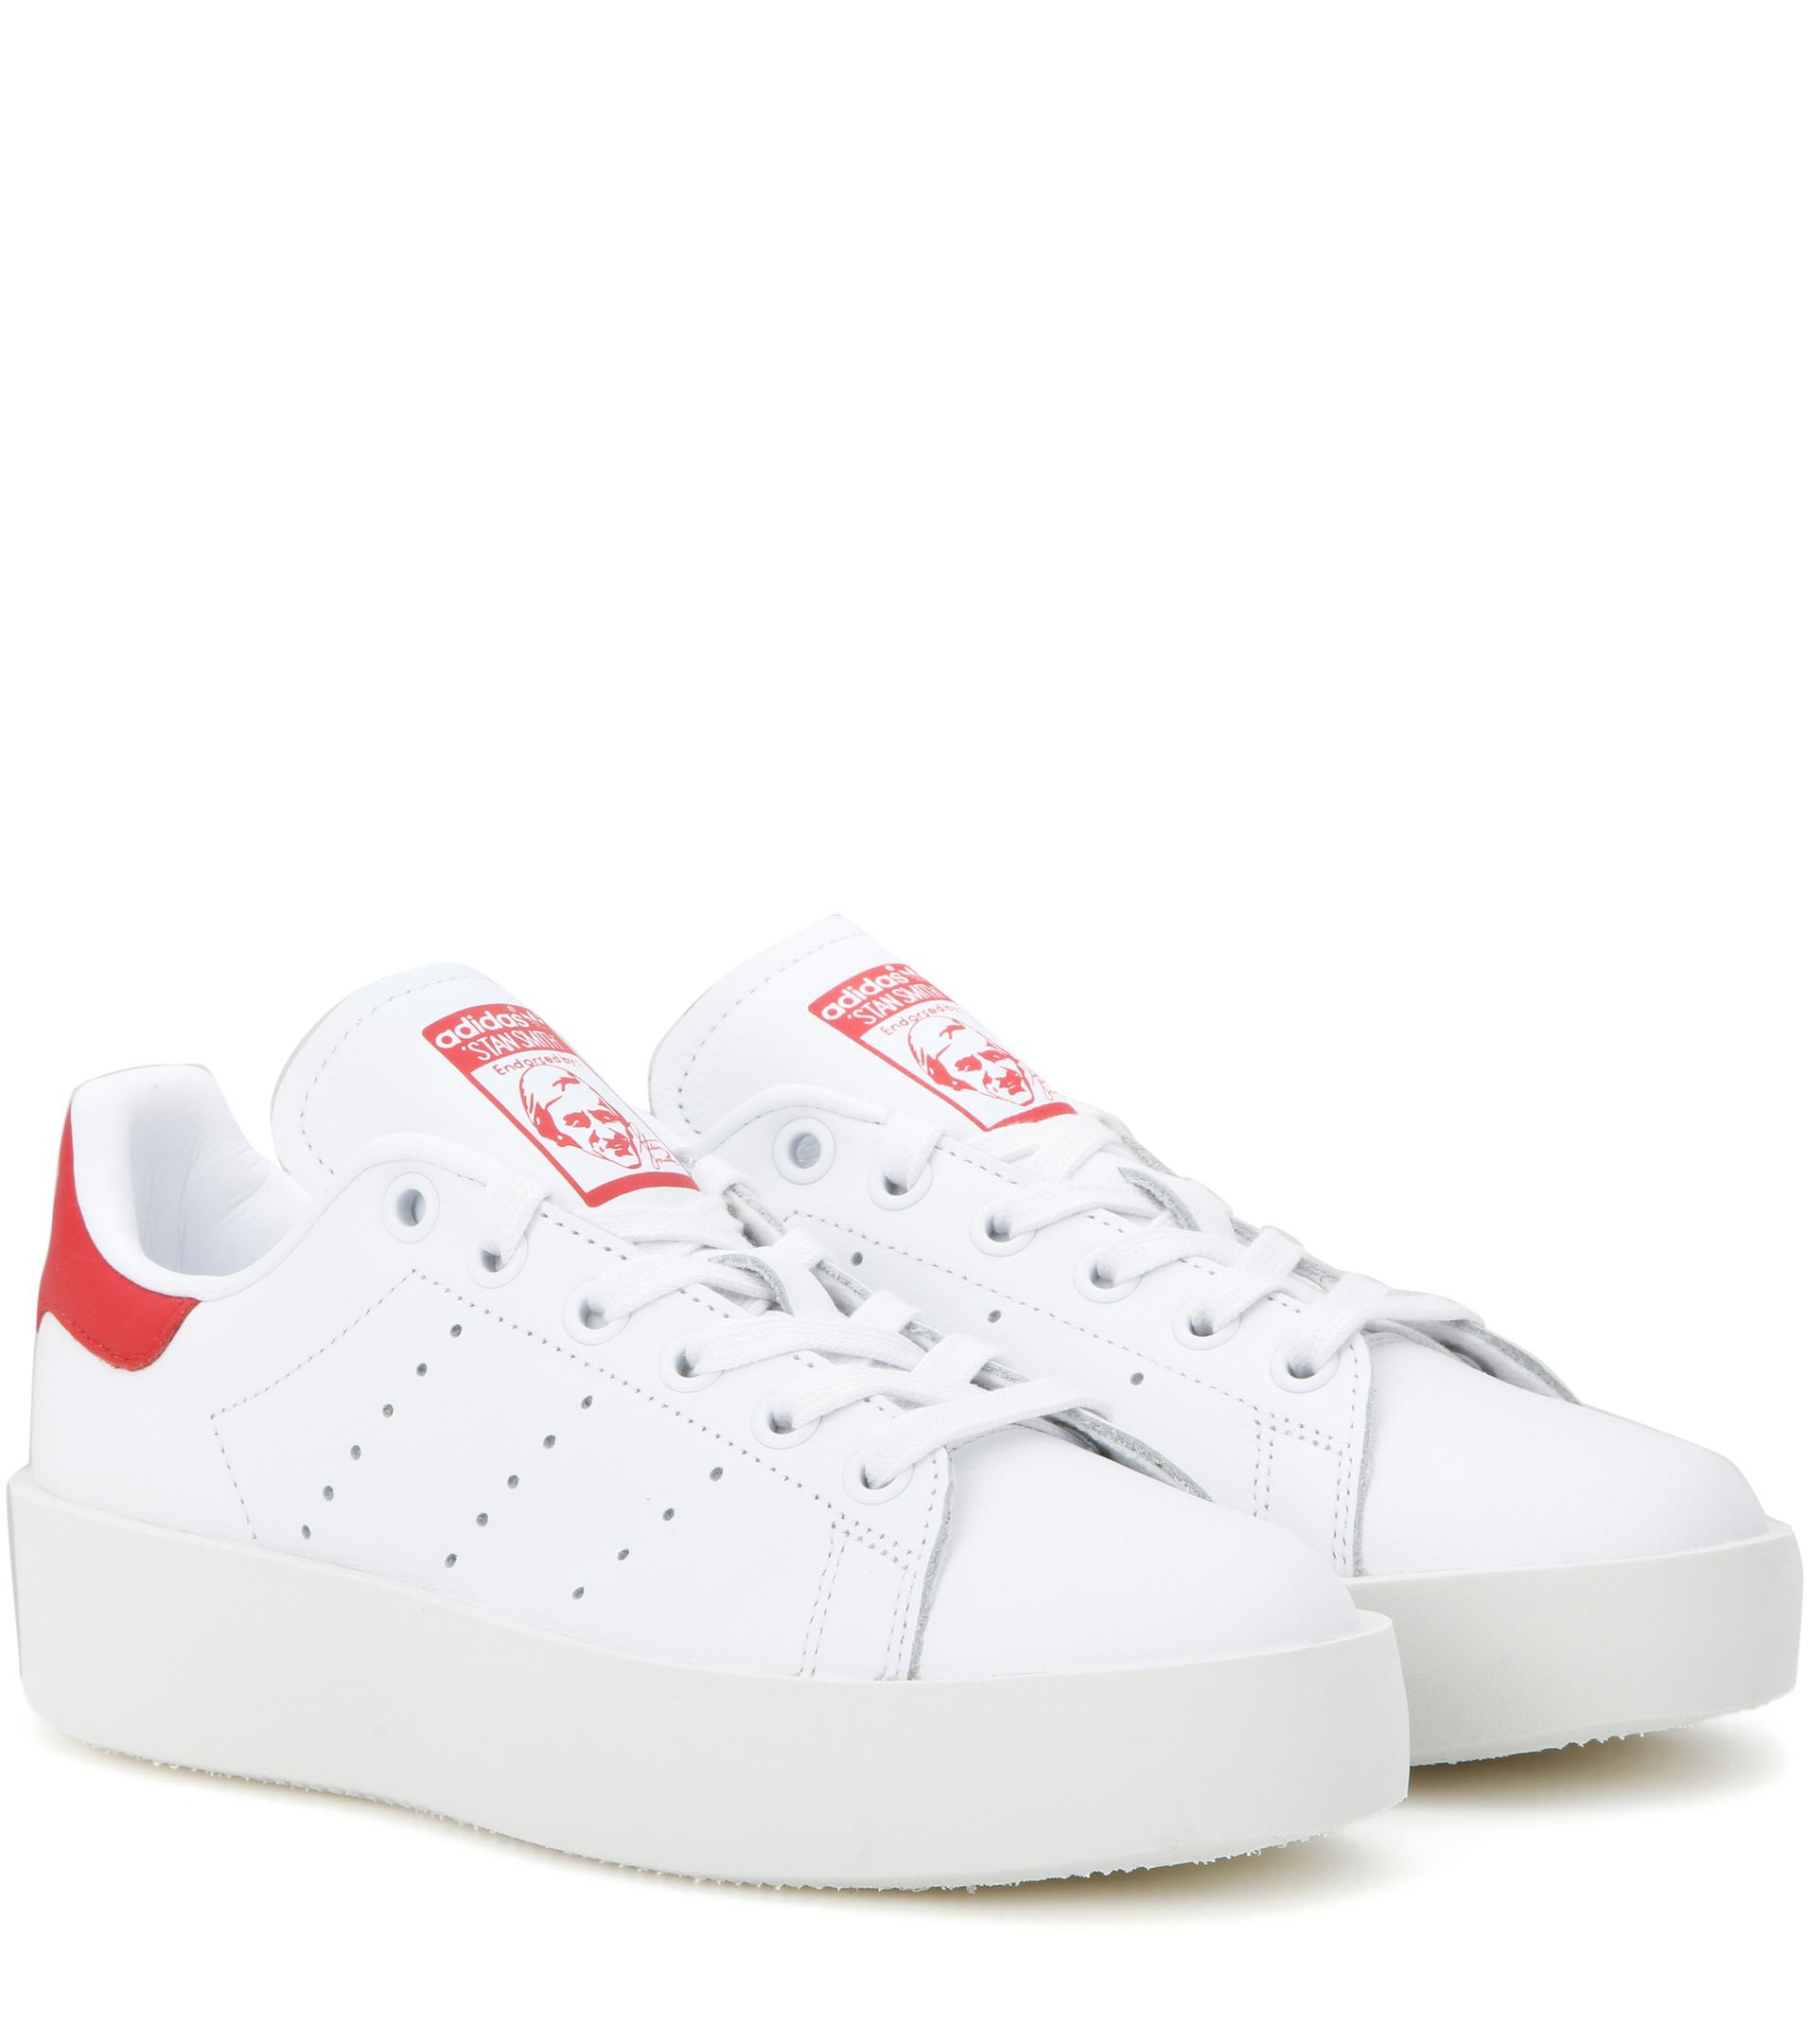 adidas stan smith trainers white red heart